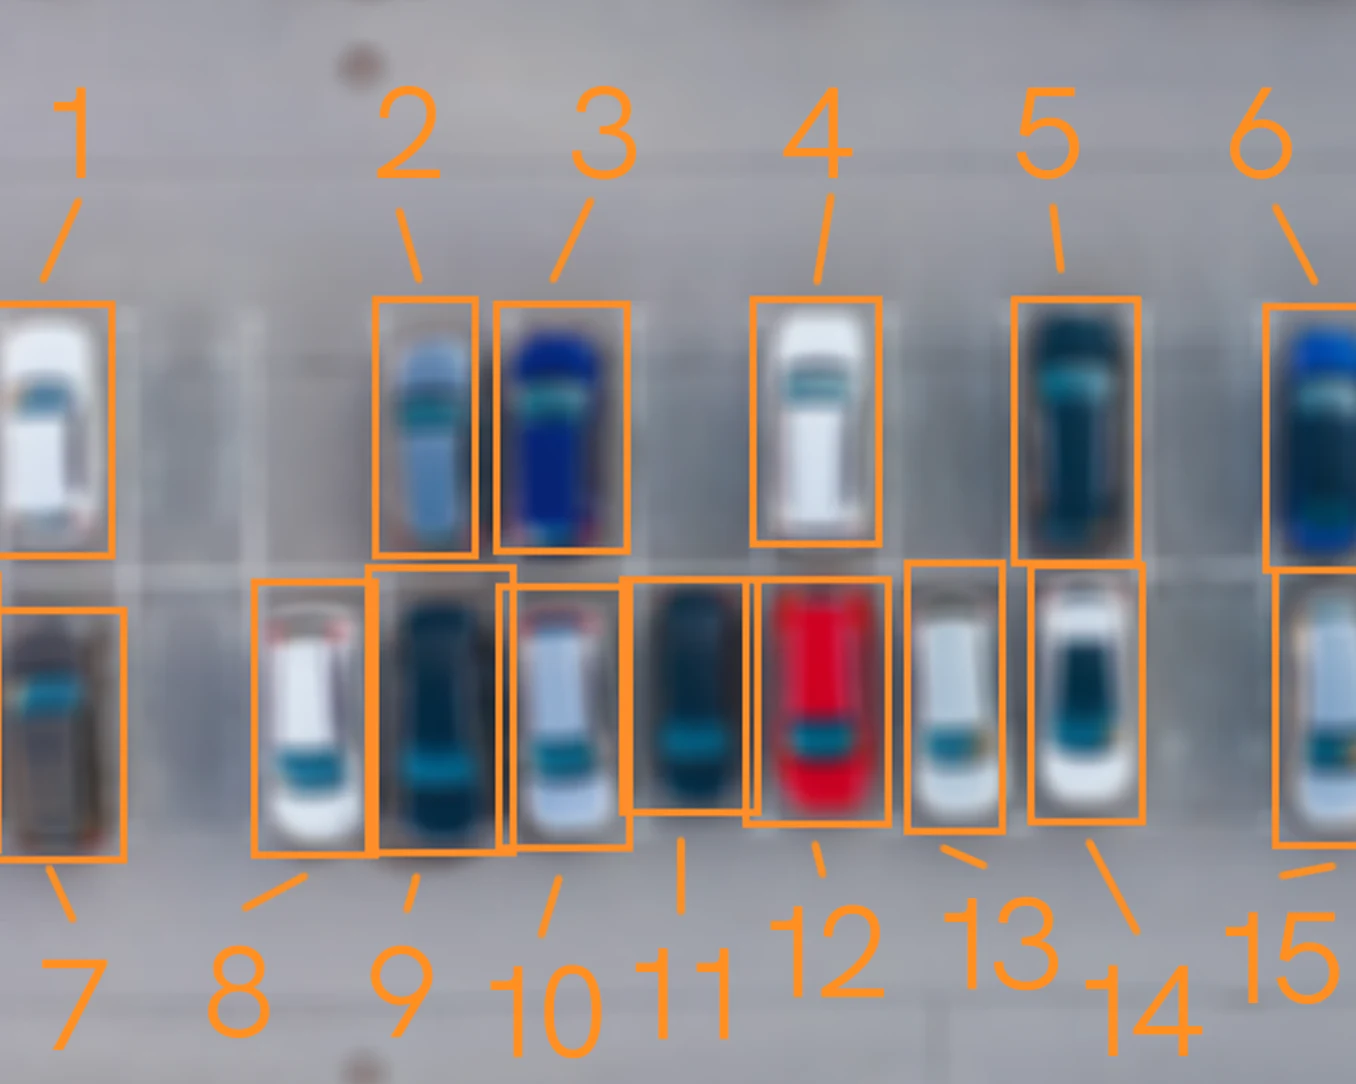 Object Detection – Counting Cars